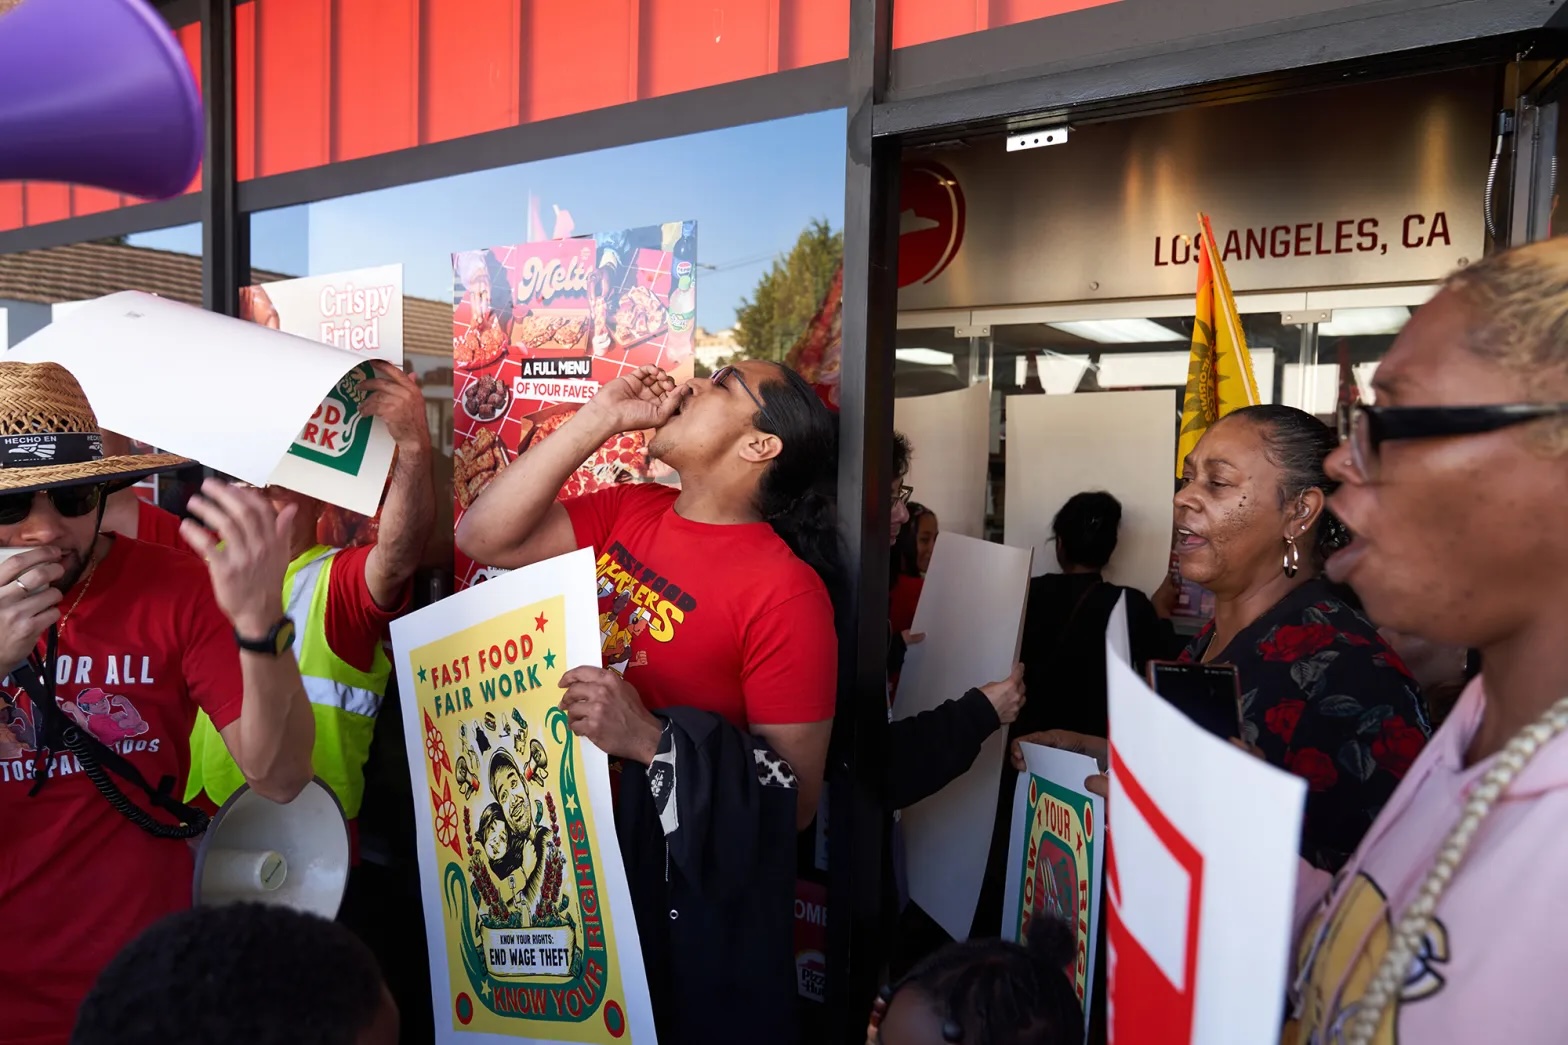 Protesters with signs outside a fast food restaurant.